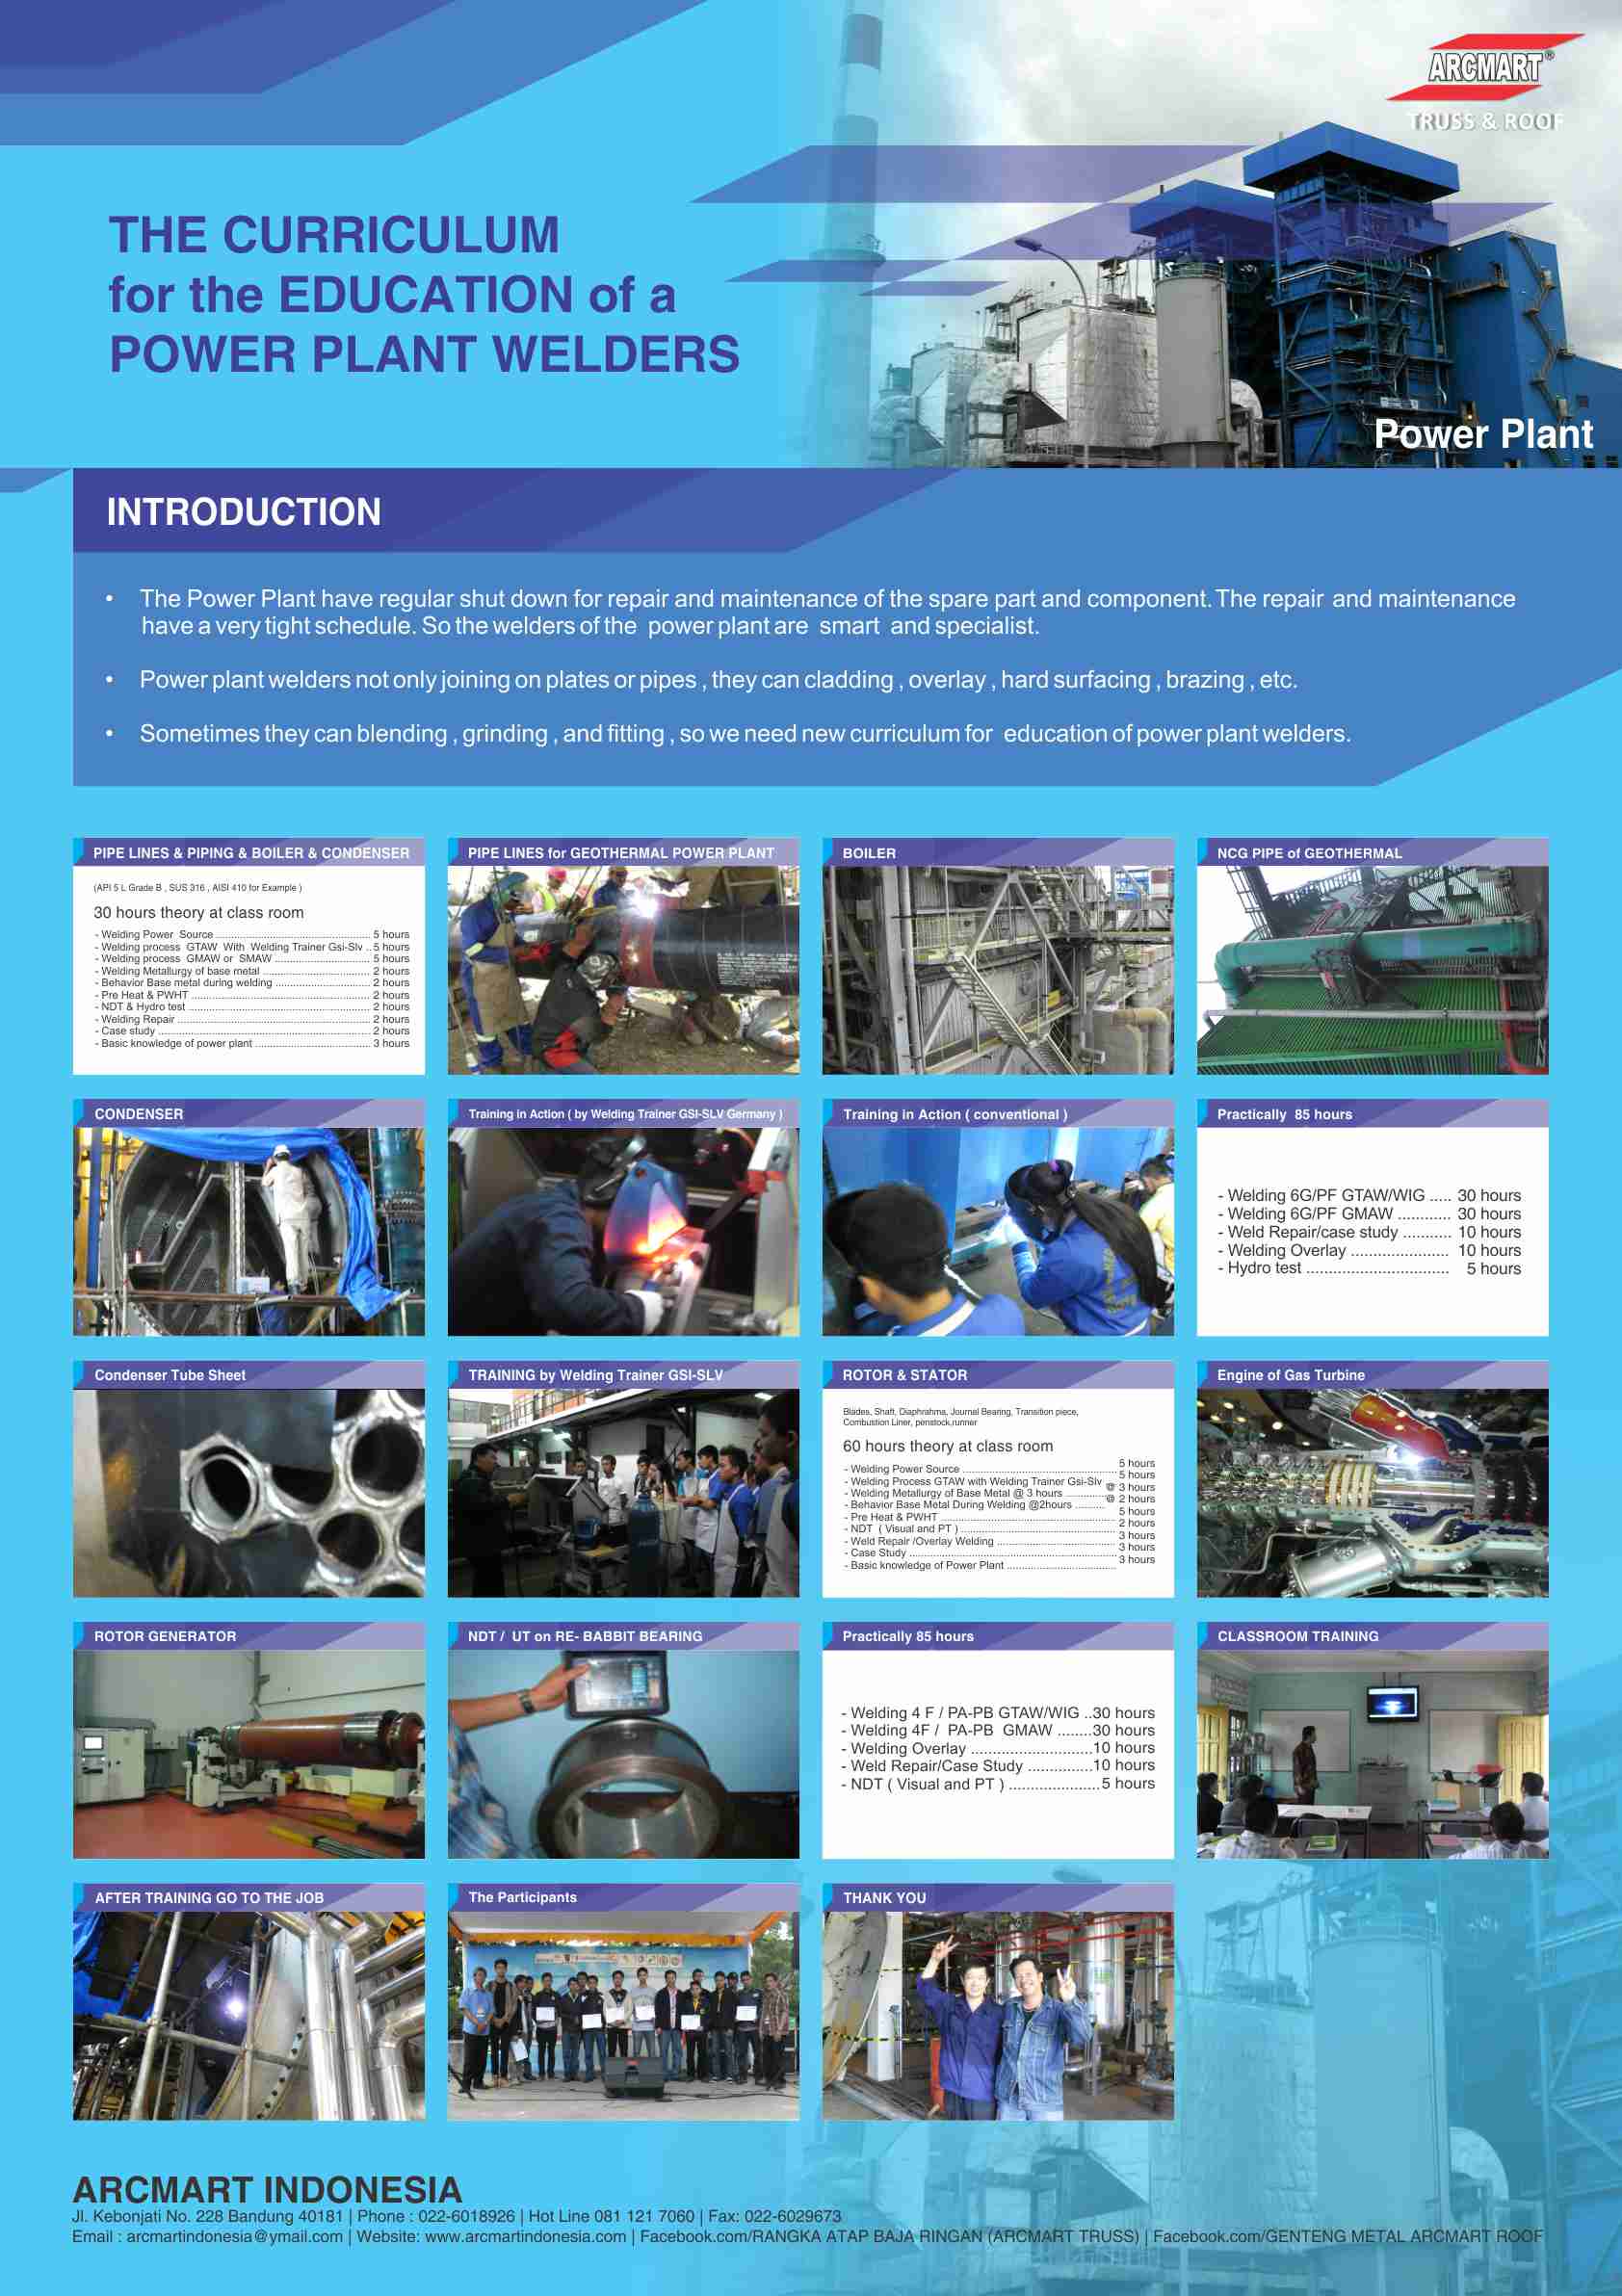 And the Curriculum of the power plant welders – The Professional Welders